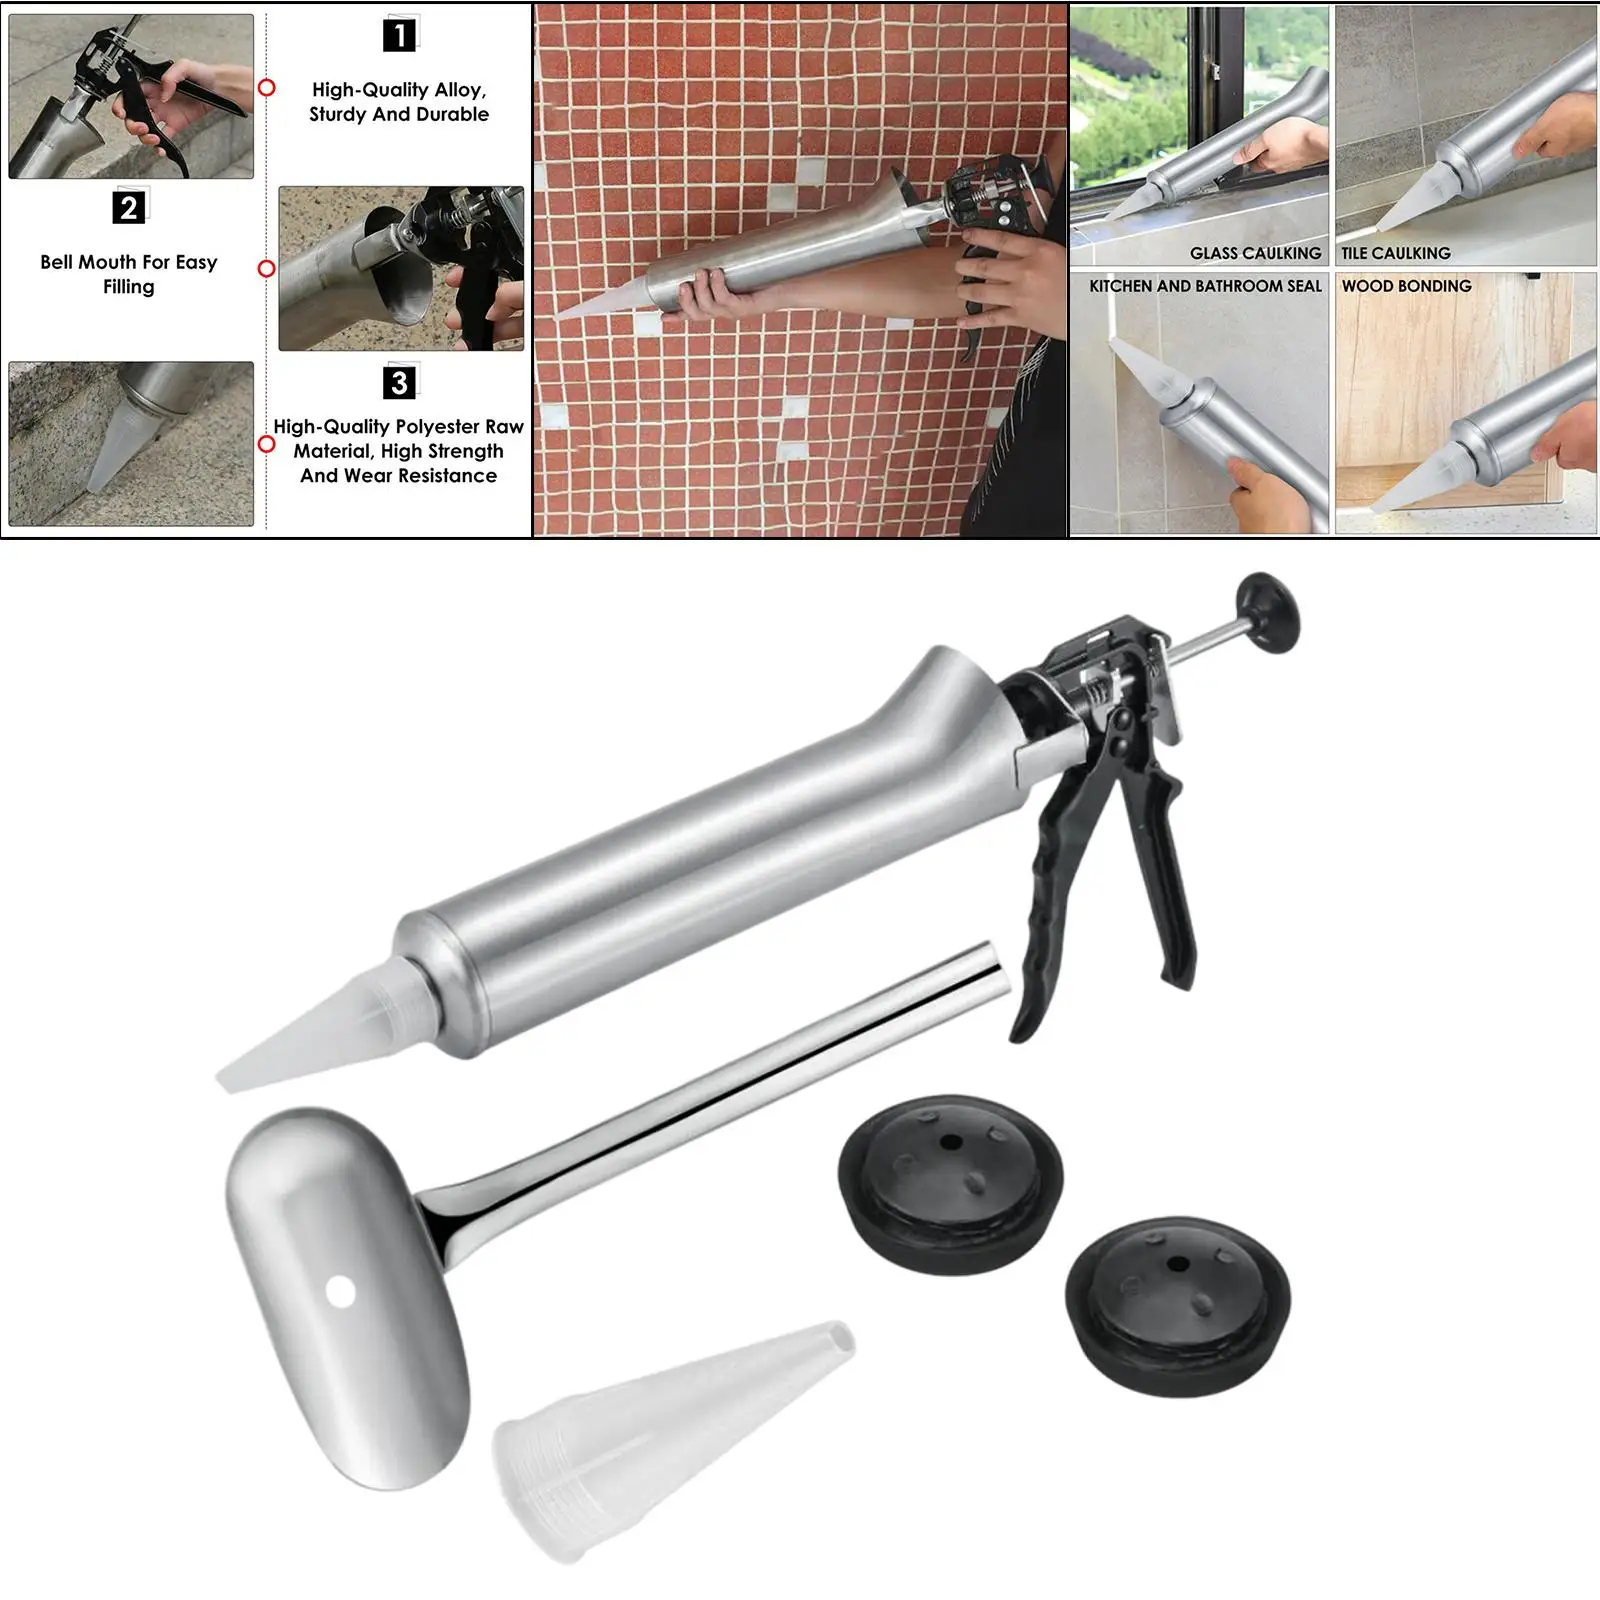 Caulking Gun Tool Thicken Stainless Steel with Nozzles Durable Tile Sealer Manual Grouting Sealant Cement